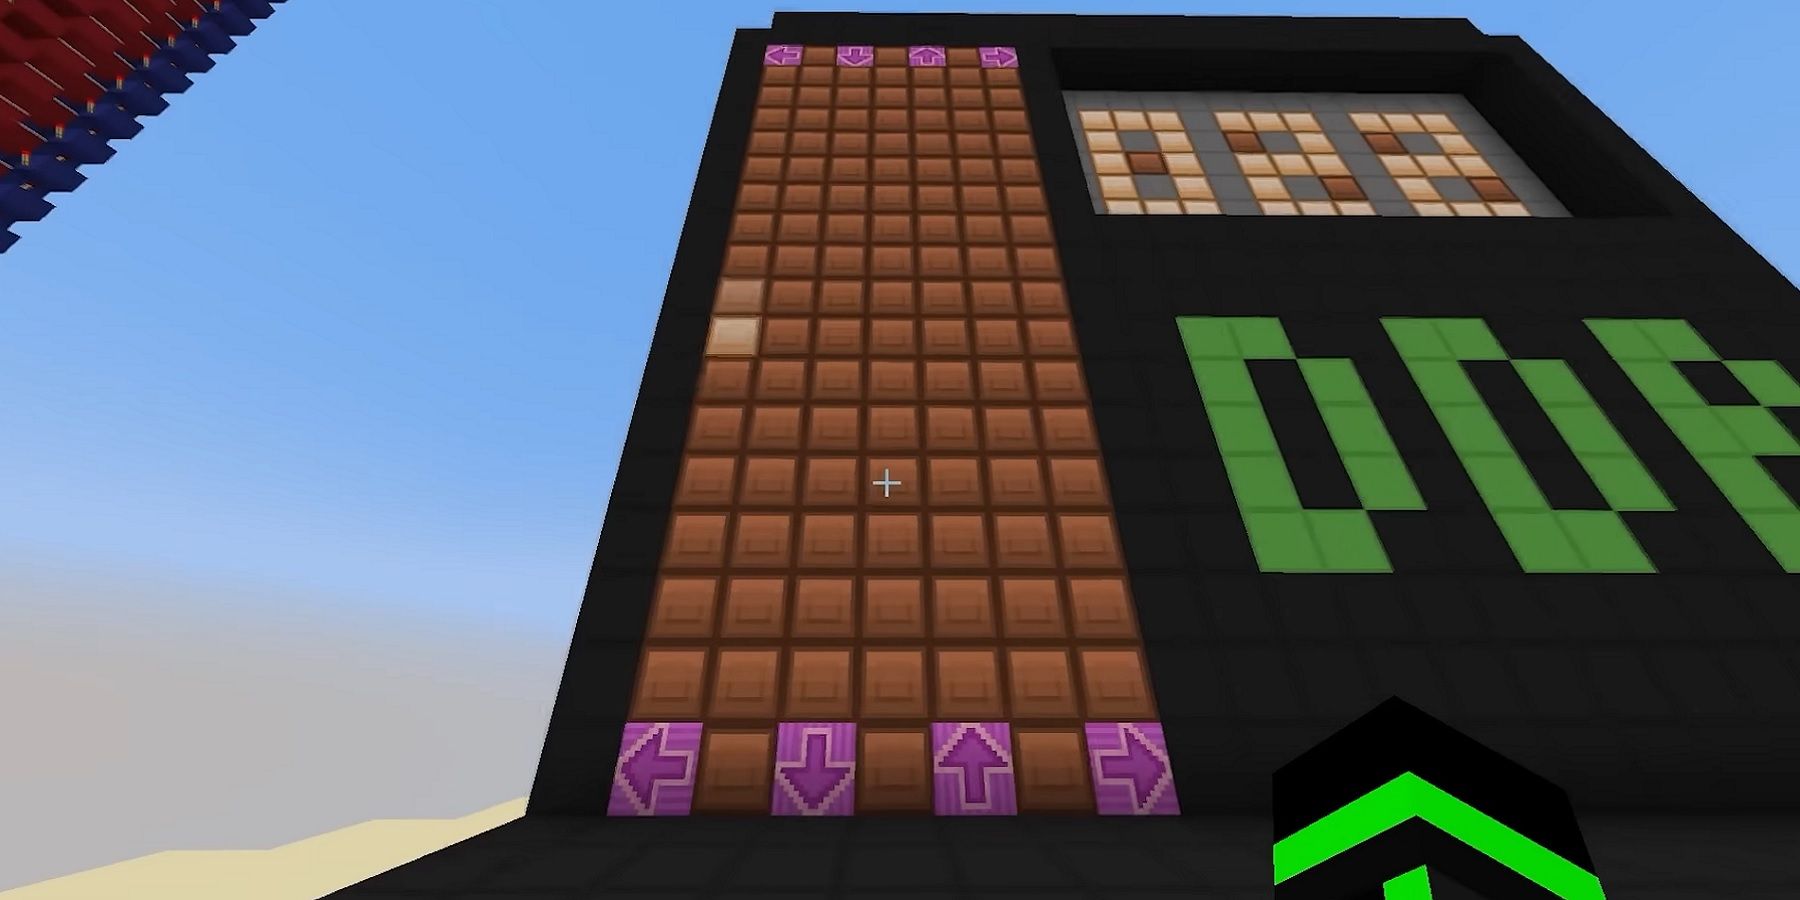 Screenshot from Minecraft showing a DDR-style game.